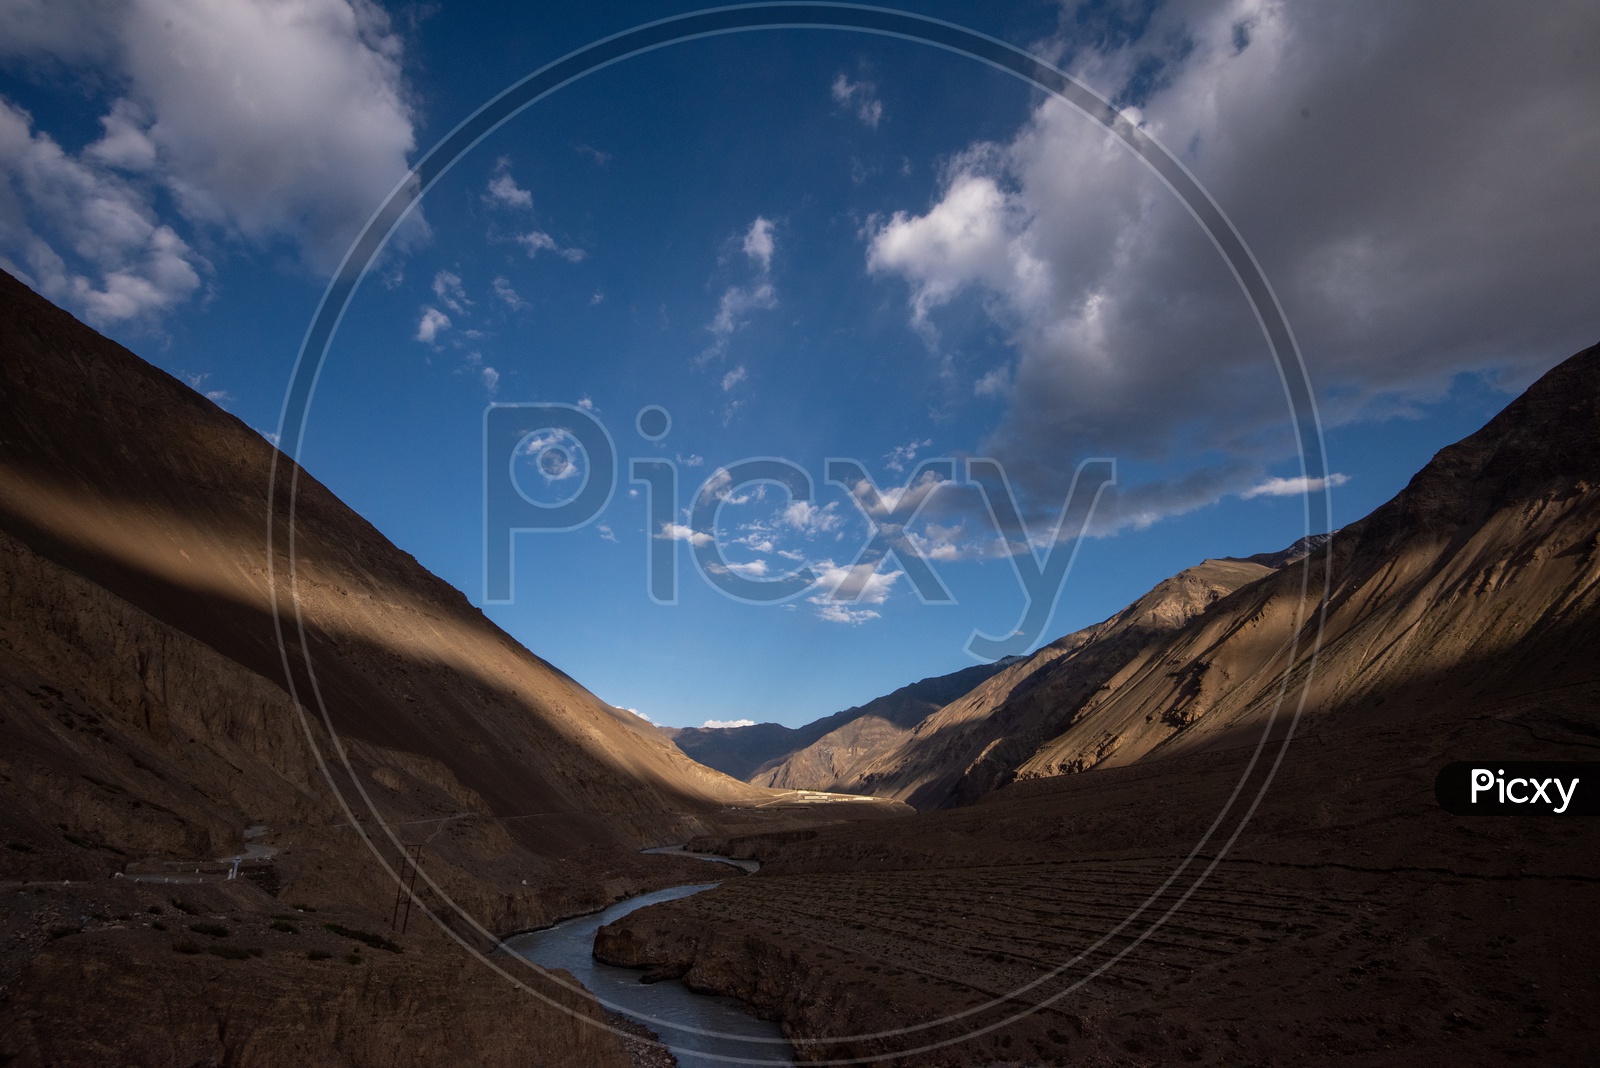 River Valleys In Leh with Sand Dunes And Blue Sky With Cotton Clouds